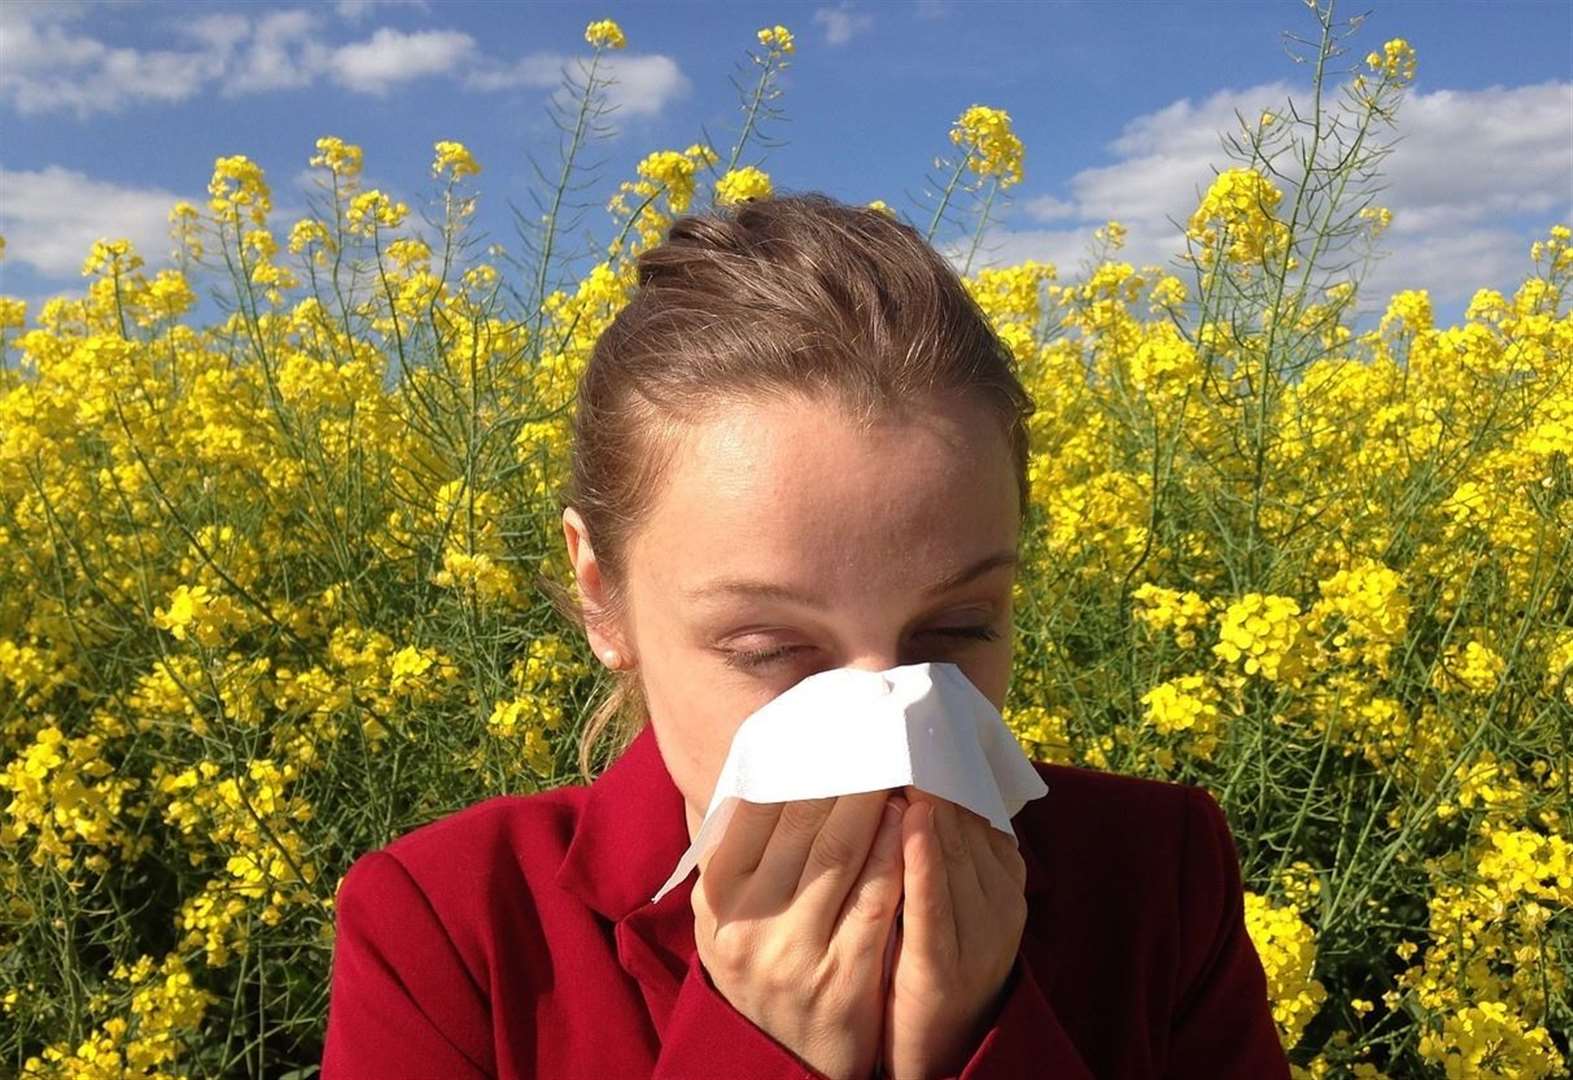 Met Office has 'good news' for hayfever sufferers